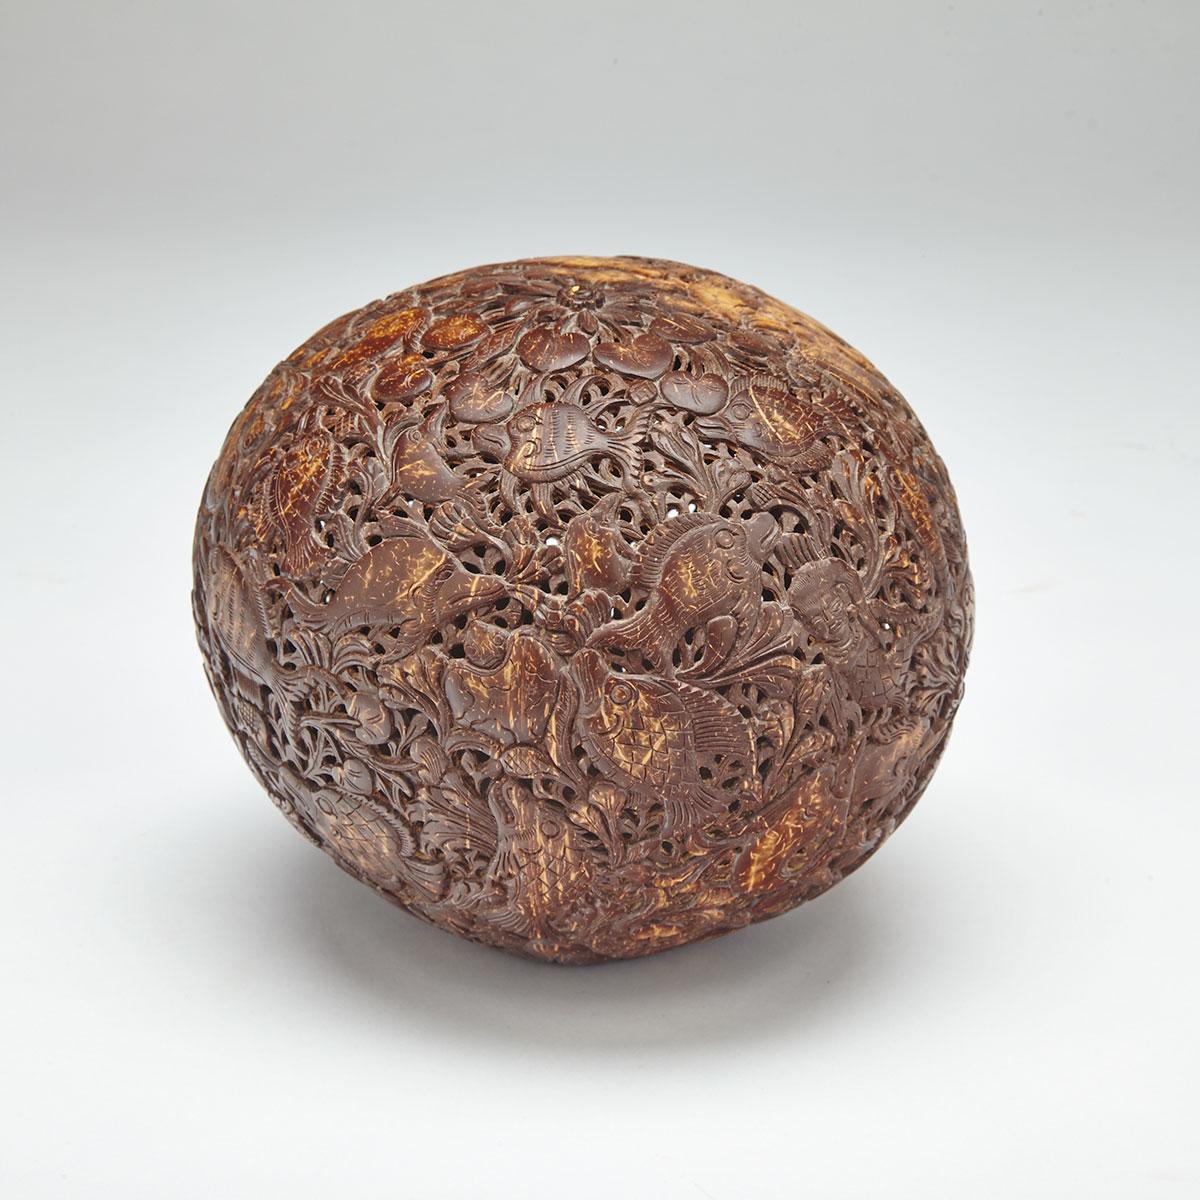 Balinese Pierce Carved Coconut Shell, mid 20th century